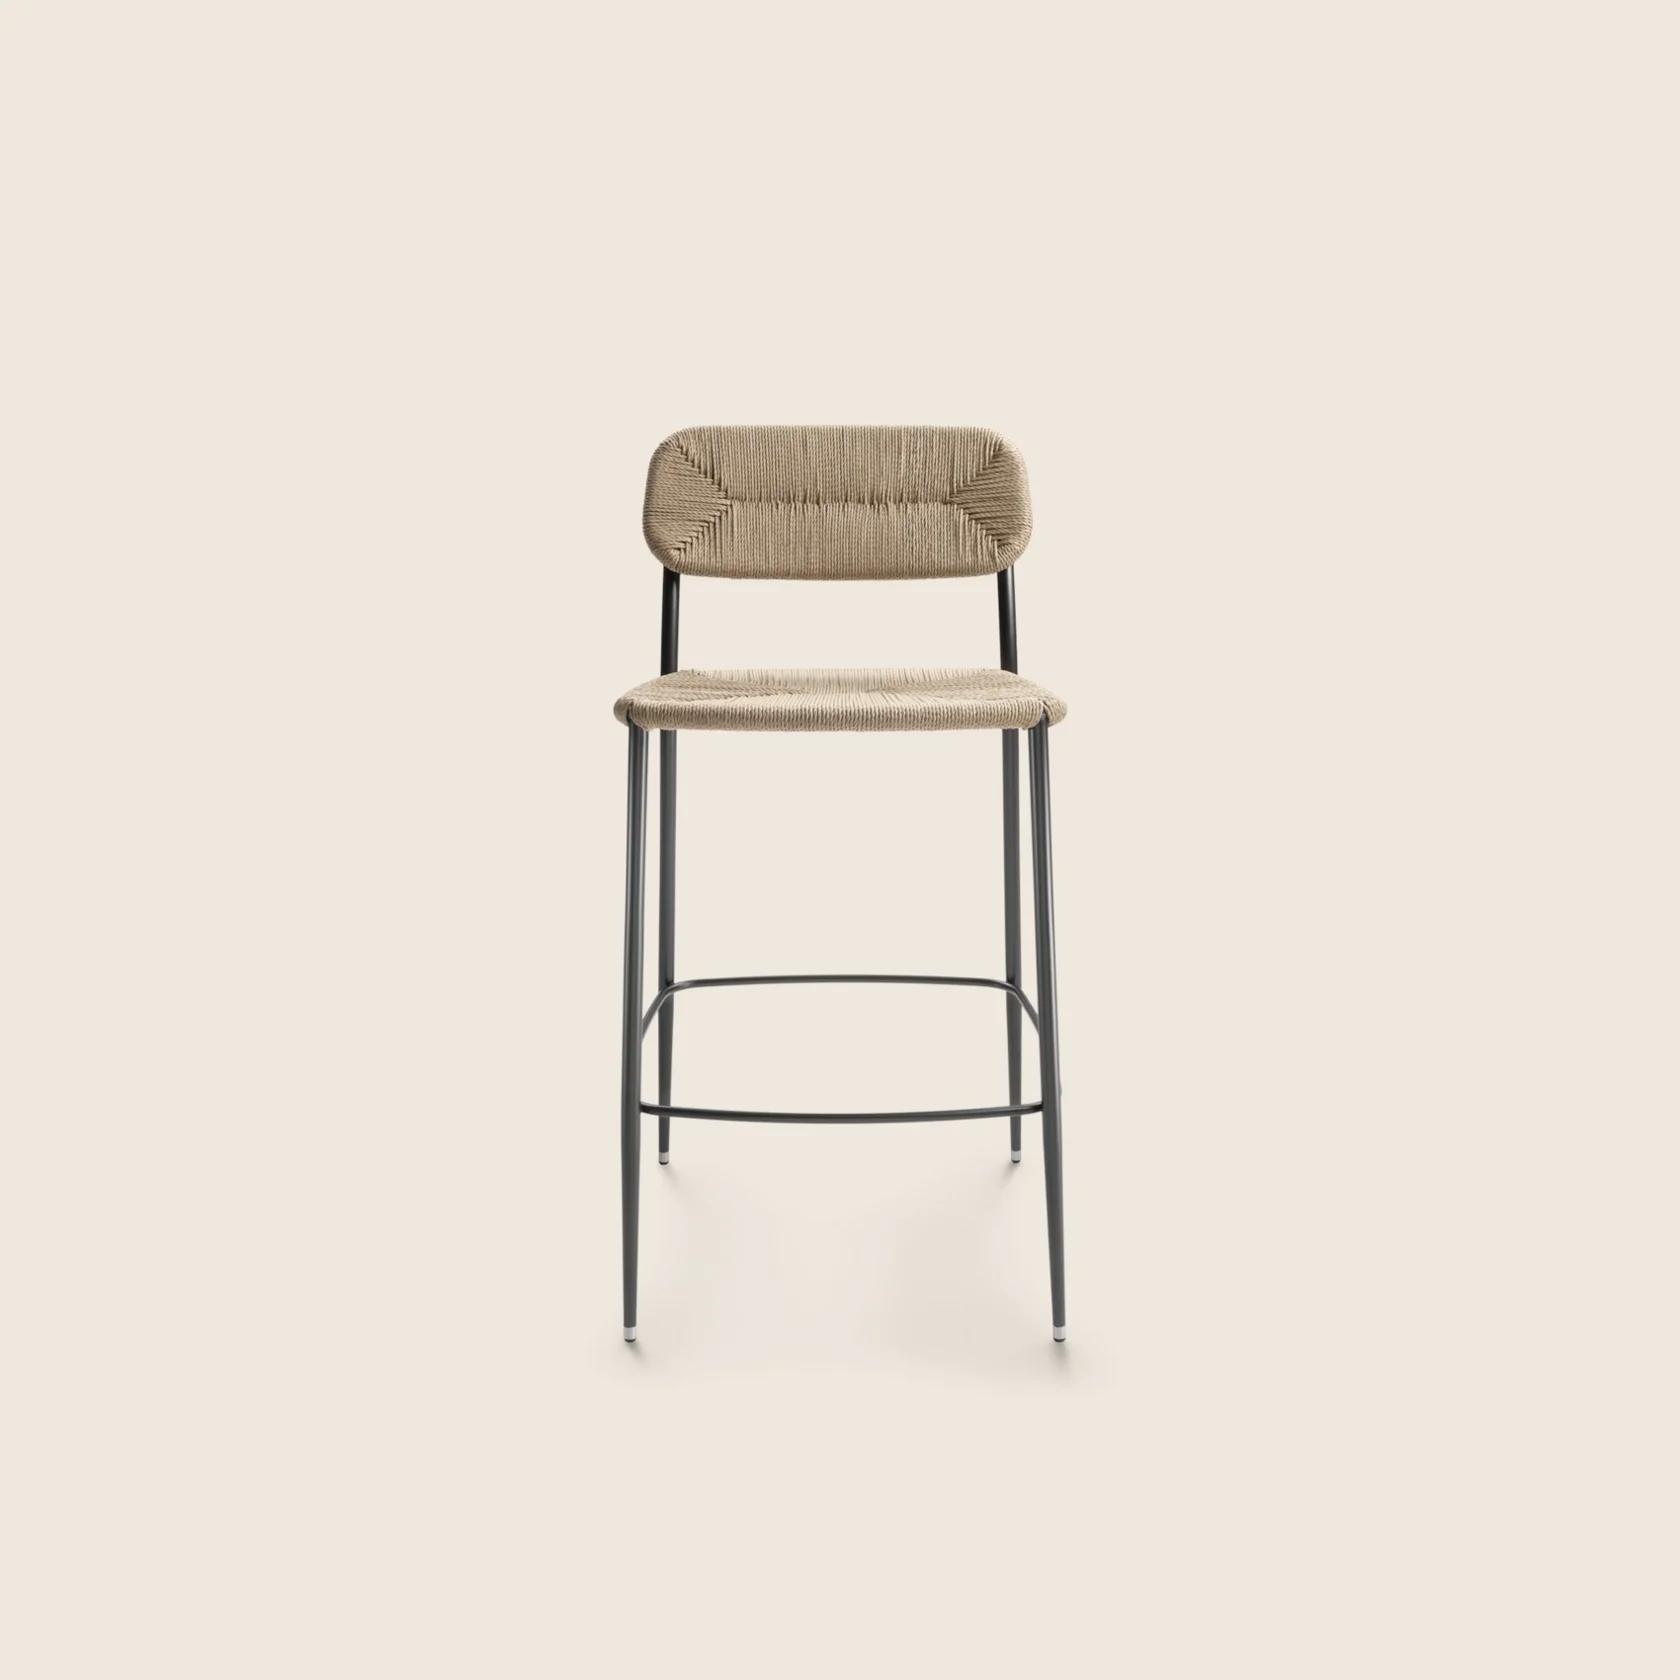 028150_FIRST STEPS_STOOL_02.png